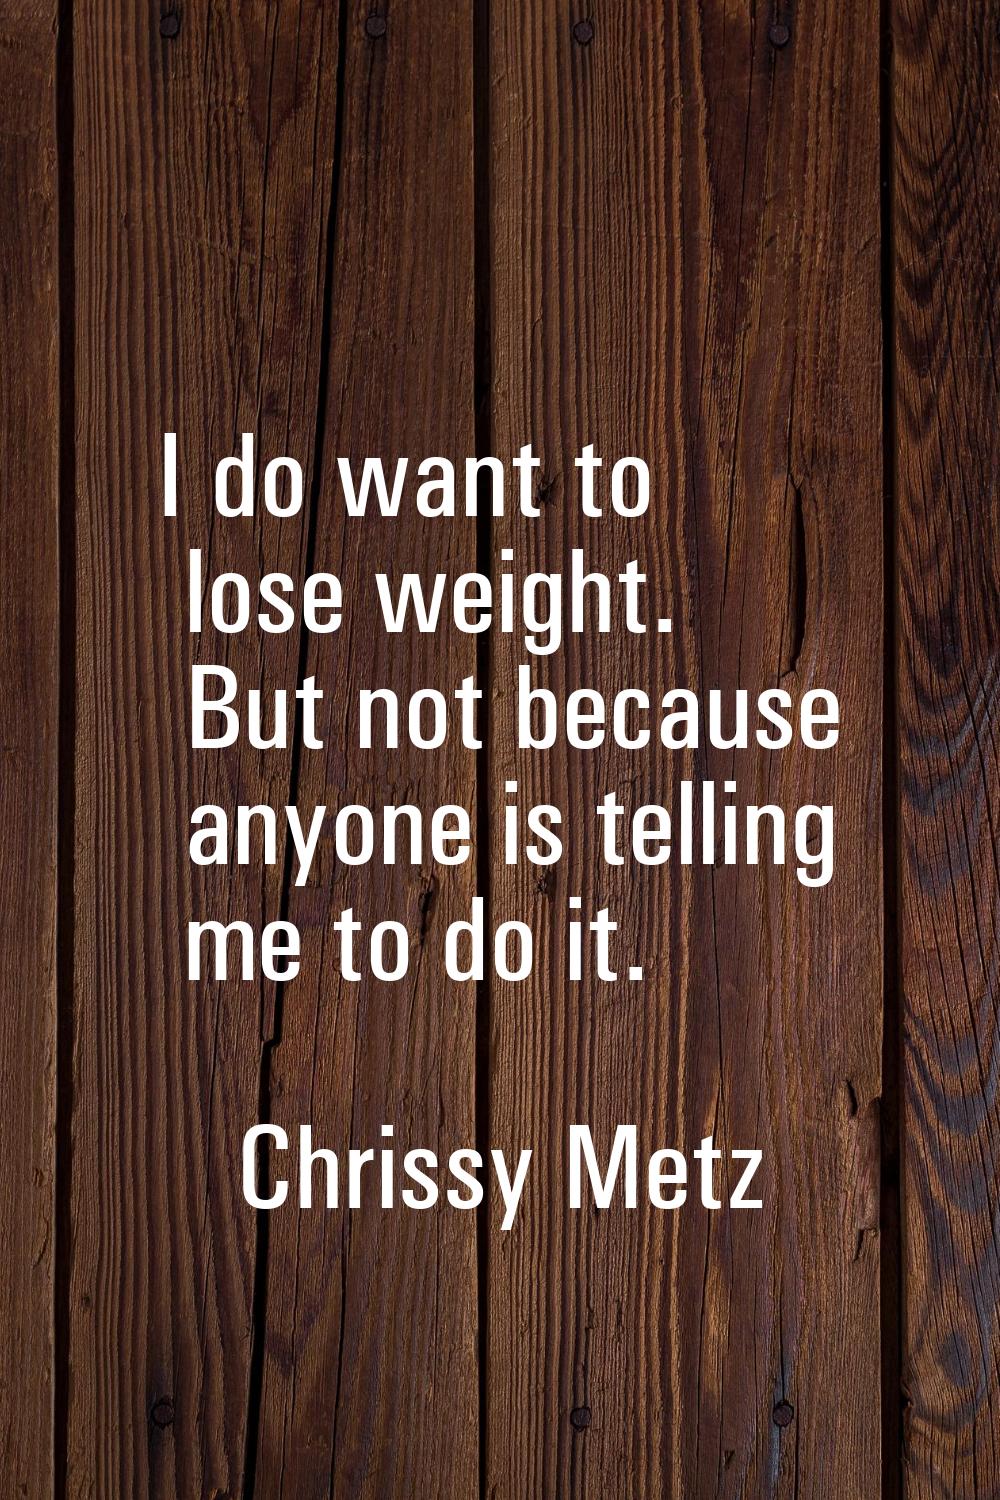 I do want to lose weight. But not because anyone is telling me to do it.